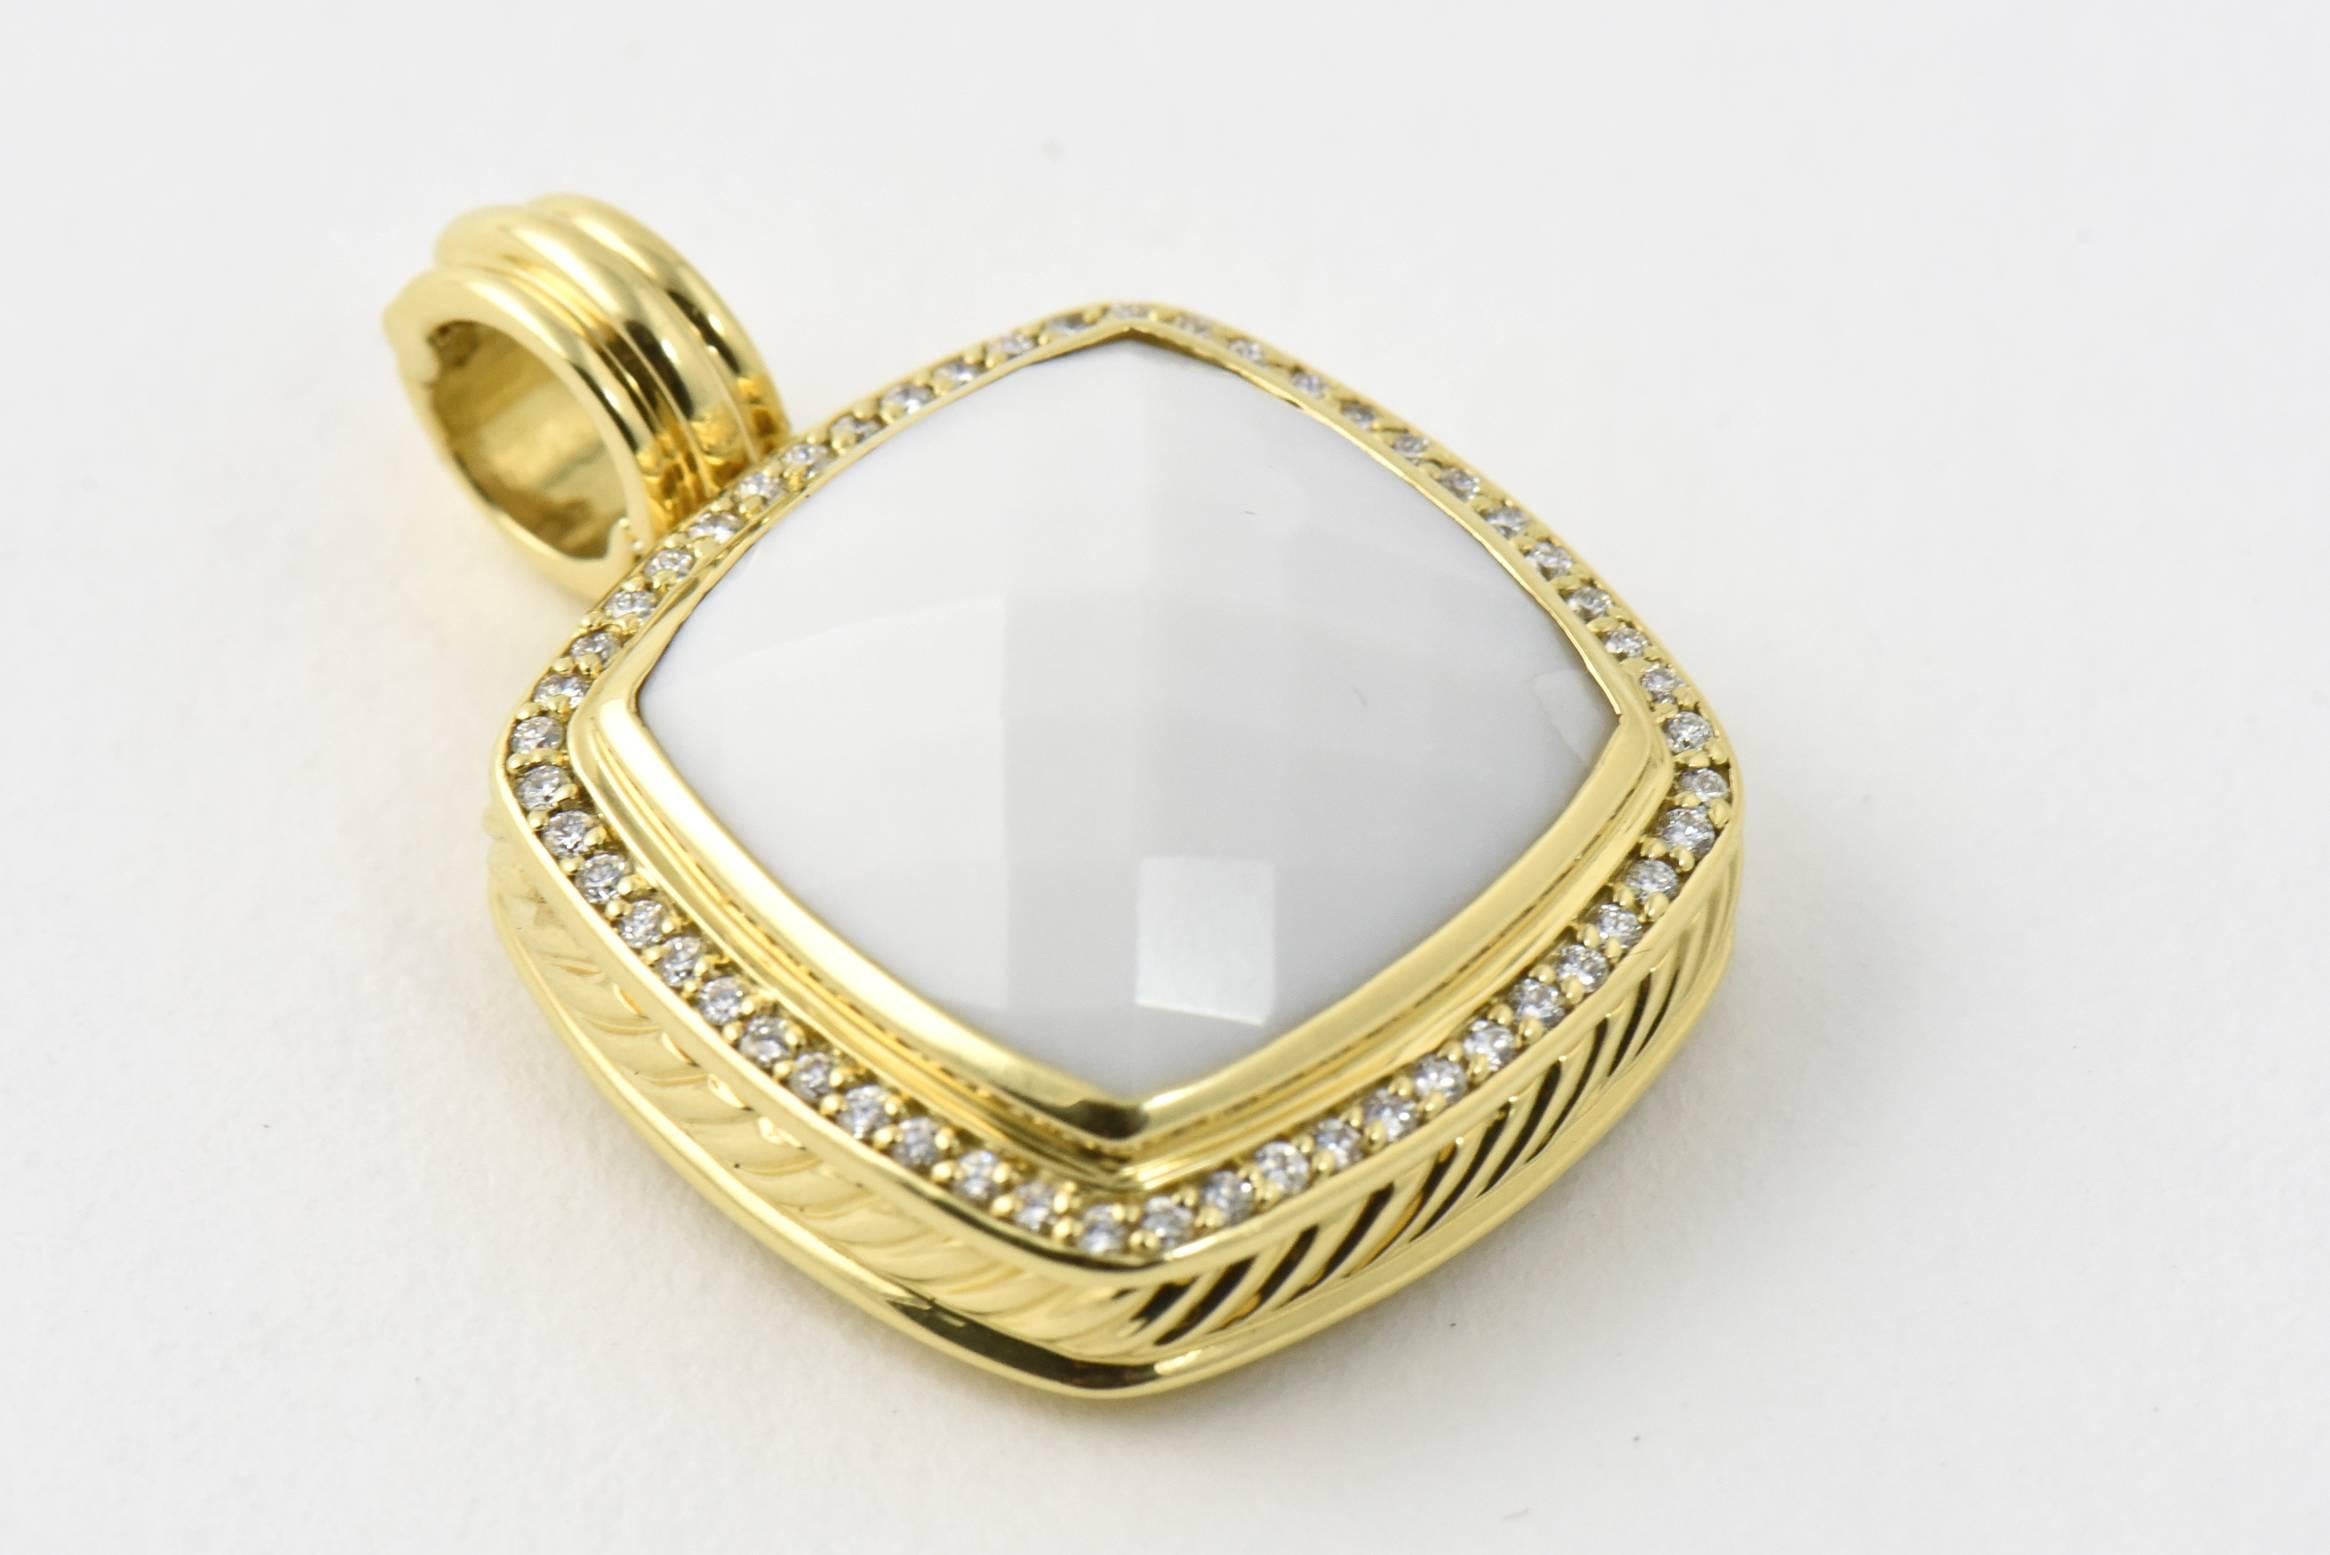 Large David Yurman 18K Yellow Gold 20mm White Agate Diamond Albion Pendant Enhancer. The pendant measures approximately 26mm wide and 13mm at it's thickest points. It features a 20mm Faceted White Agate Stone set in a diamond frame containing